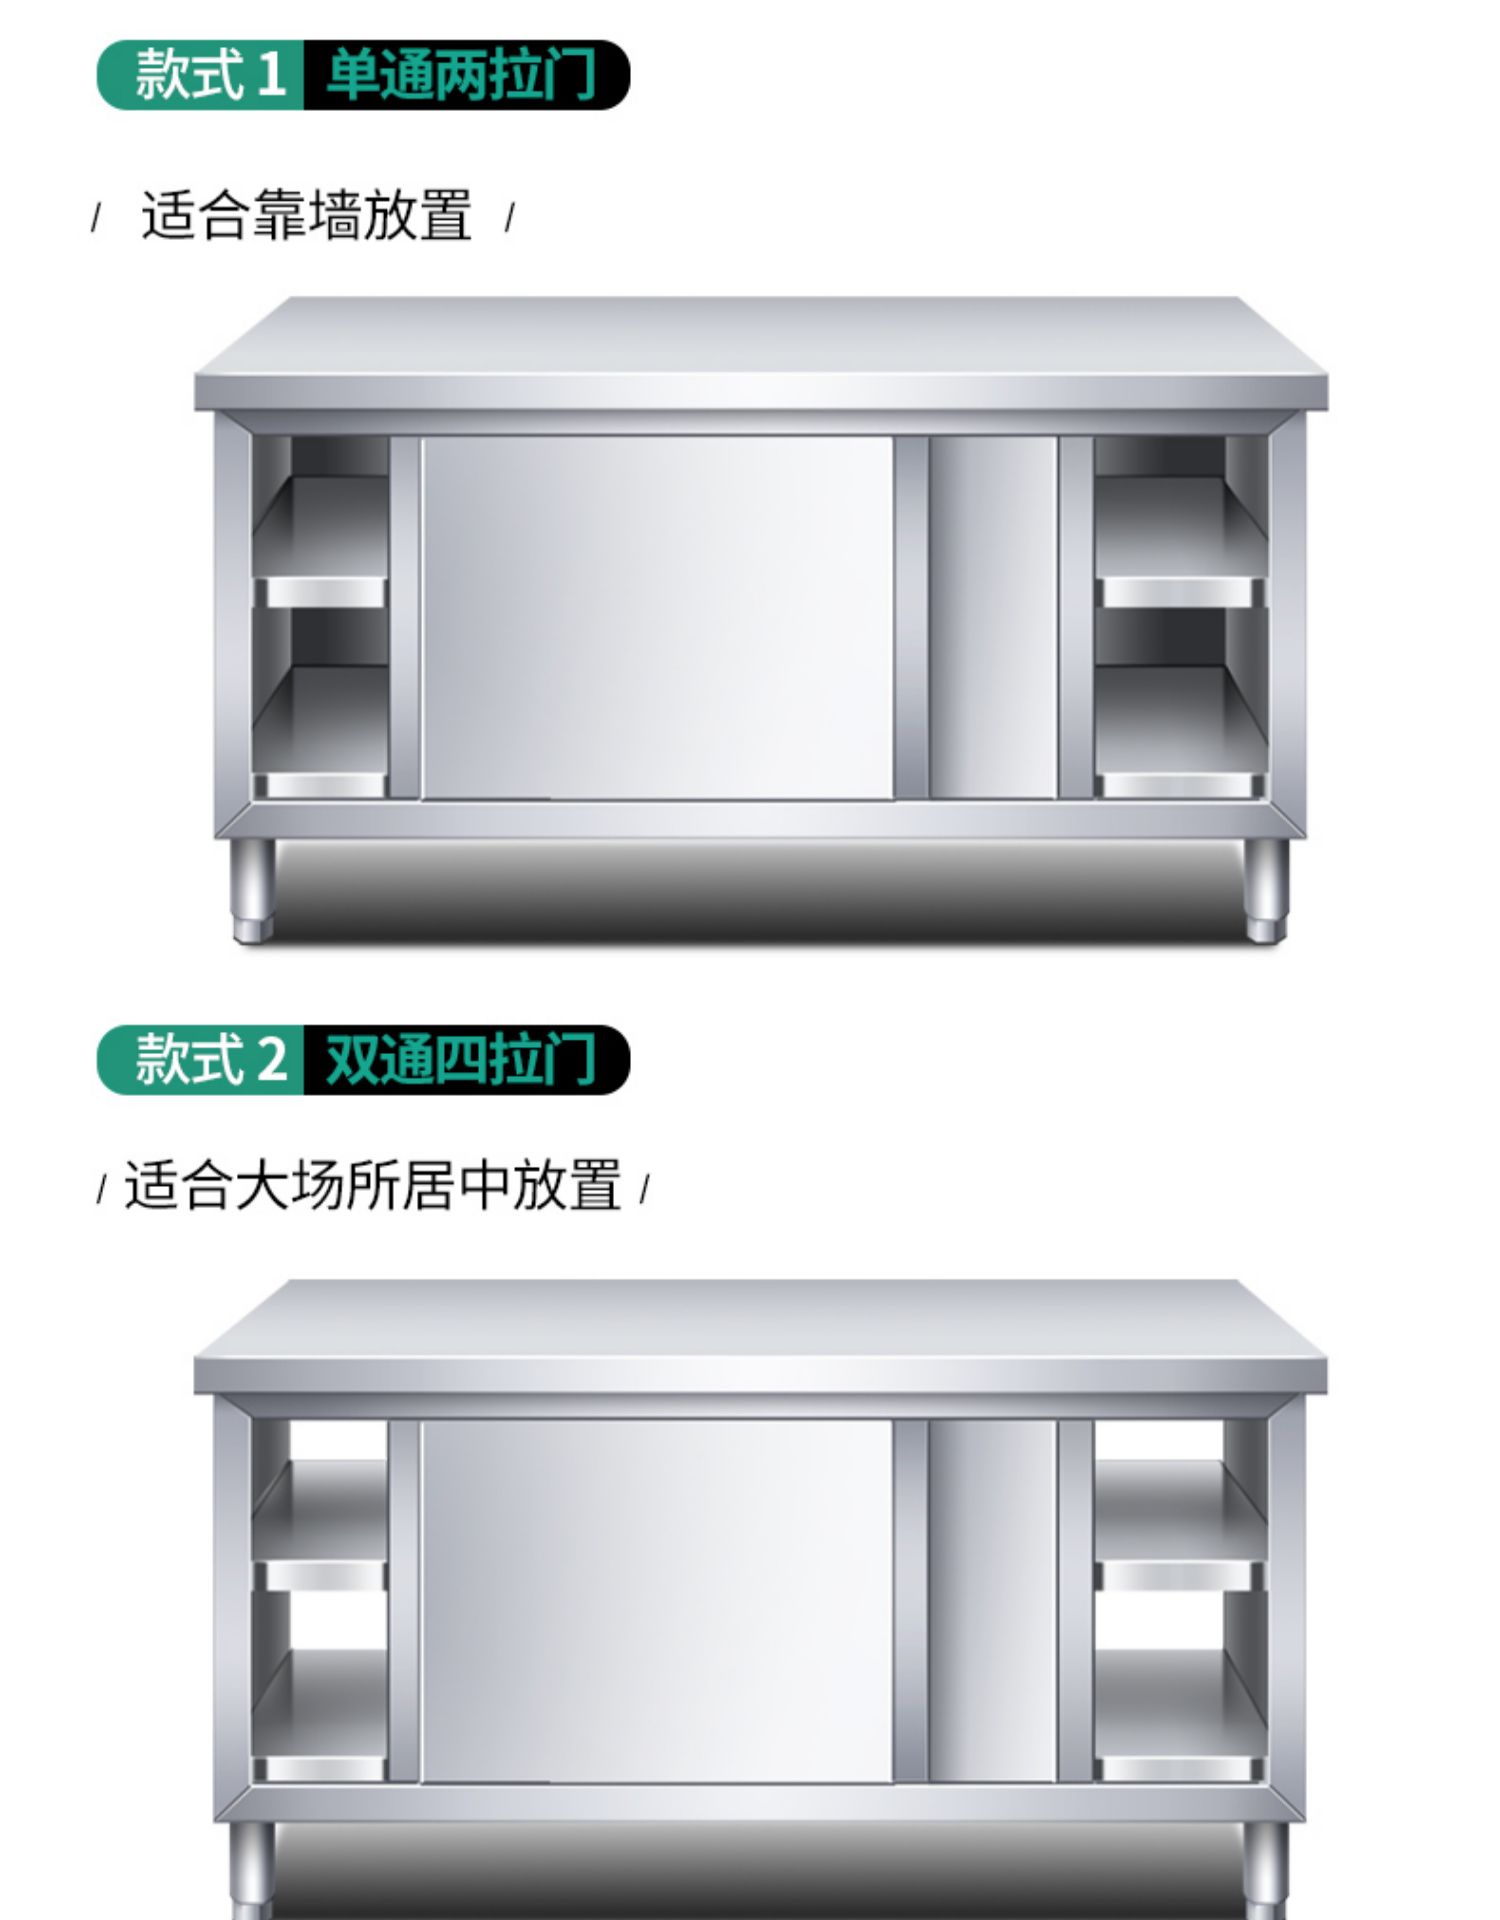 Bowl style commercial kitchen thickened sliding door workbench stainless steel countertop kitchen cabinet storage cabinet push pull loading operation table